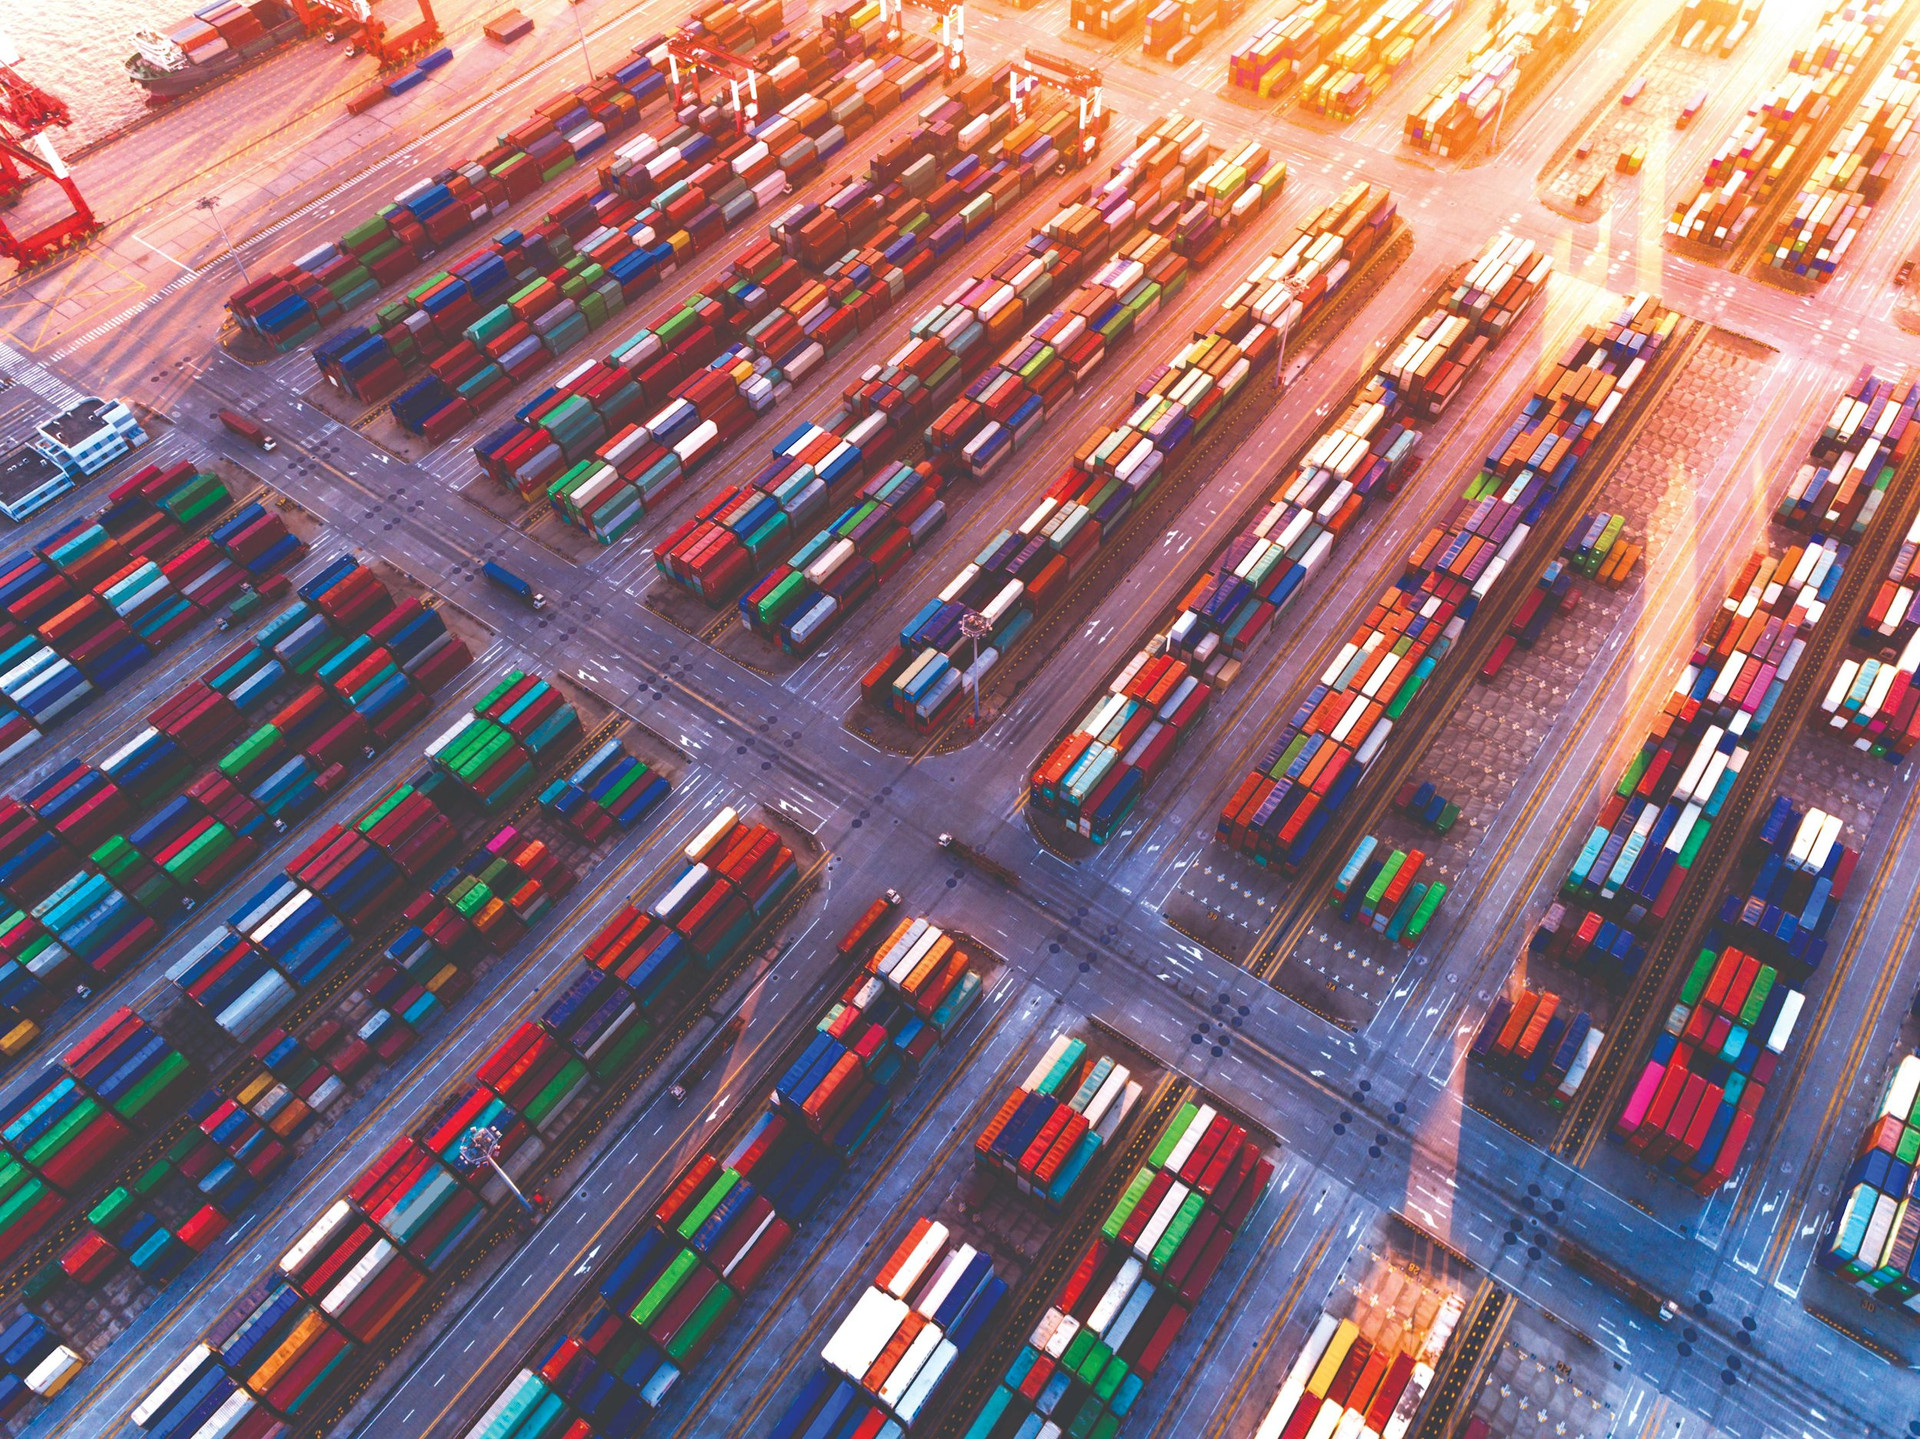 shanghai-container-terminal-dusk-one-largest-cargo-port-world_1-compressed.jpeg